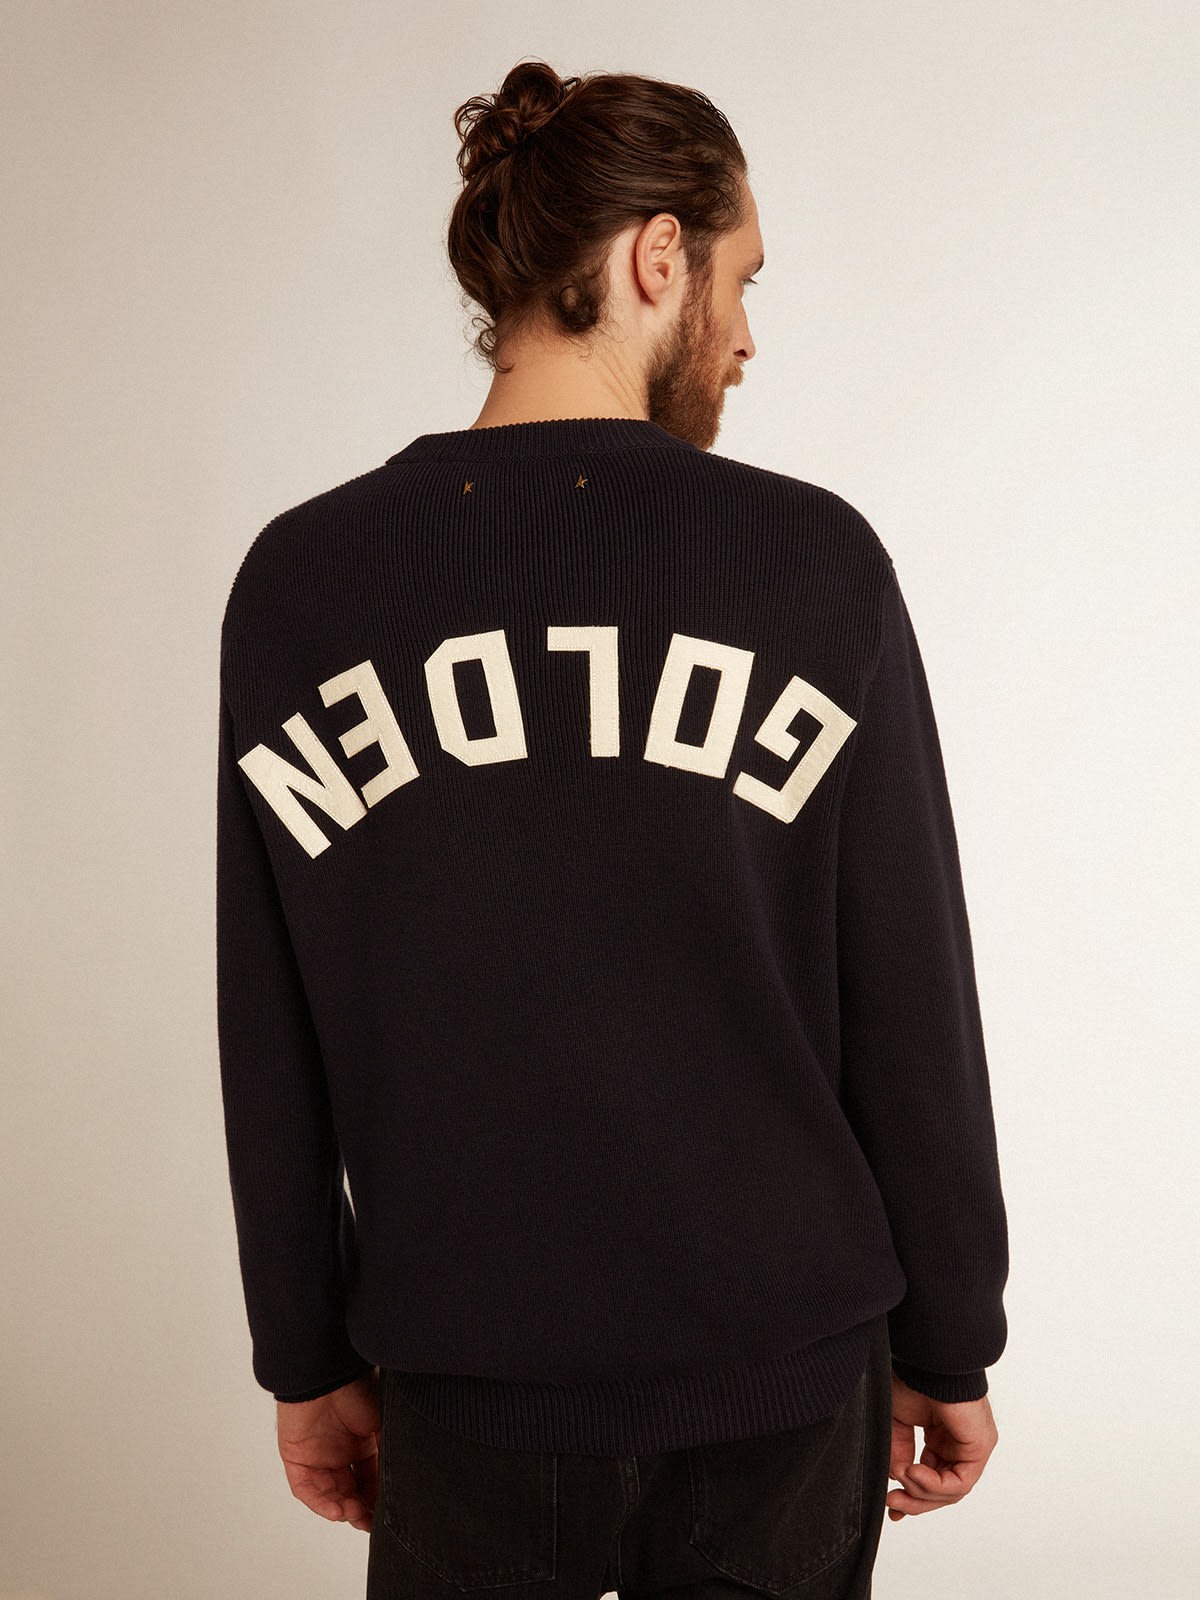 Golden Goose - Men’s round-neck sweater in dark blue cotton with logo on the back in 